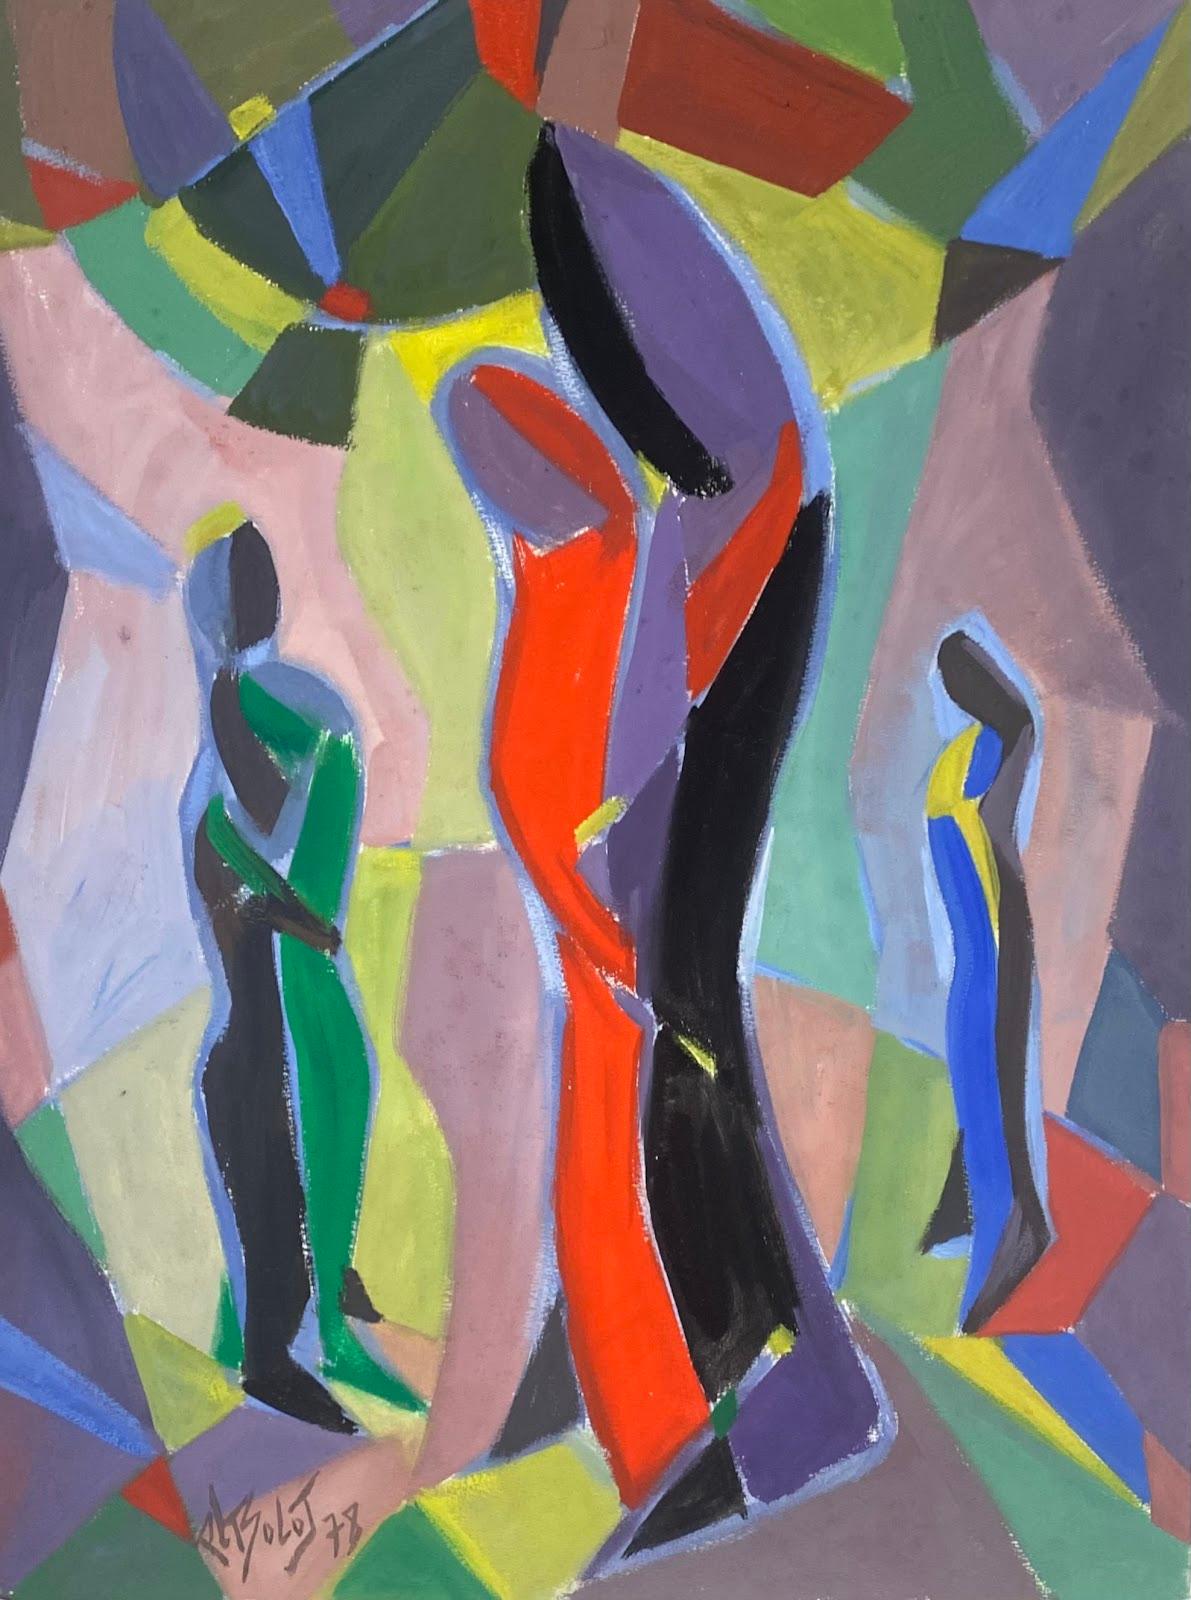 Paul-Louis Bolot (French 1918-2003) Figurative Painting - 1970's French Modernist Gouache Painting Colorful Cubist Figures 